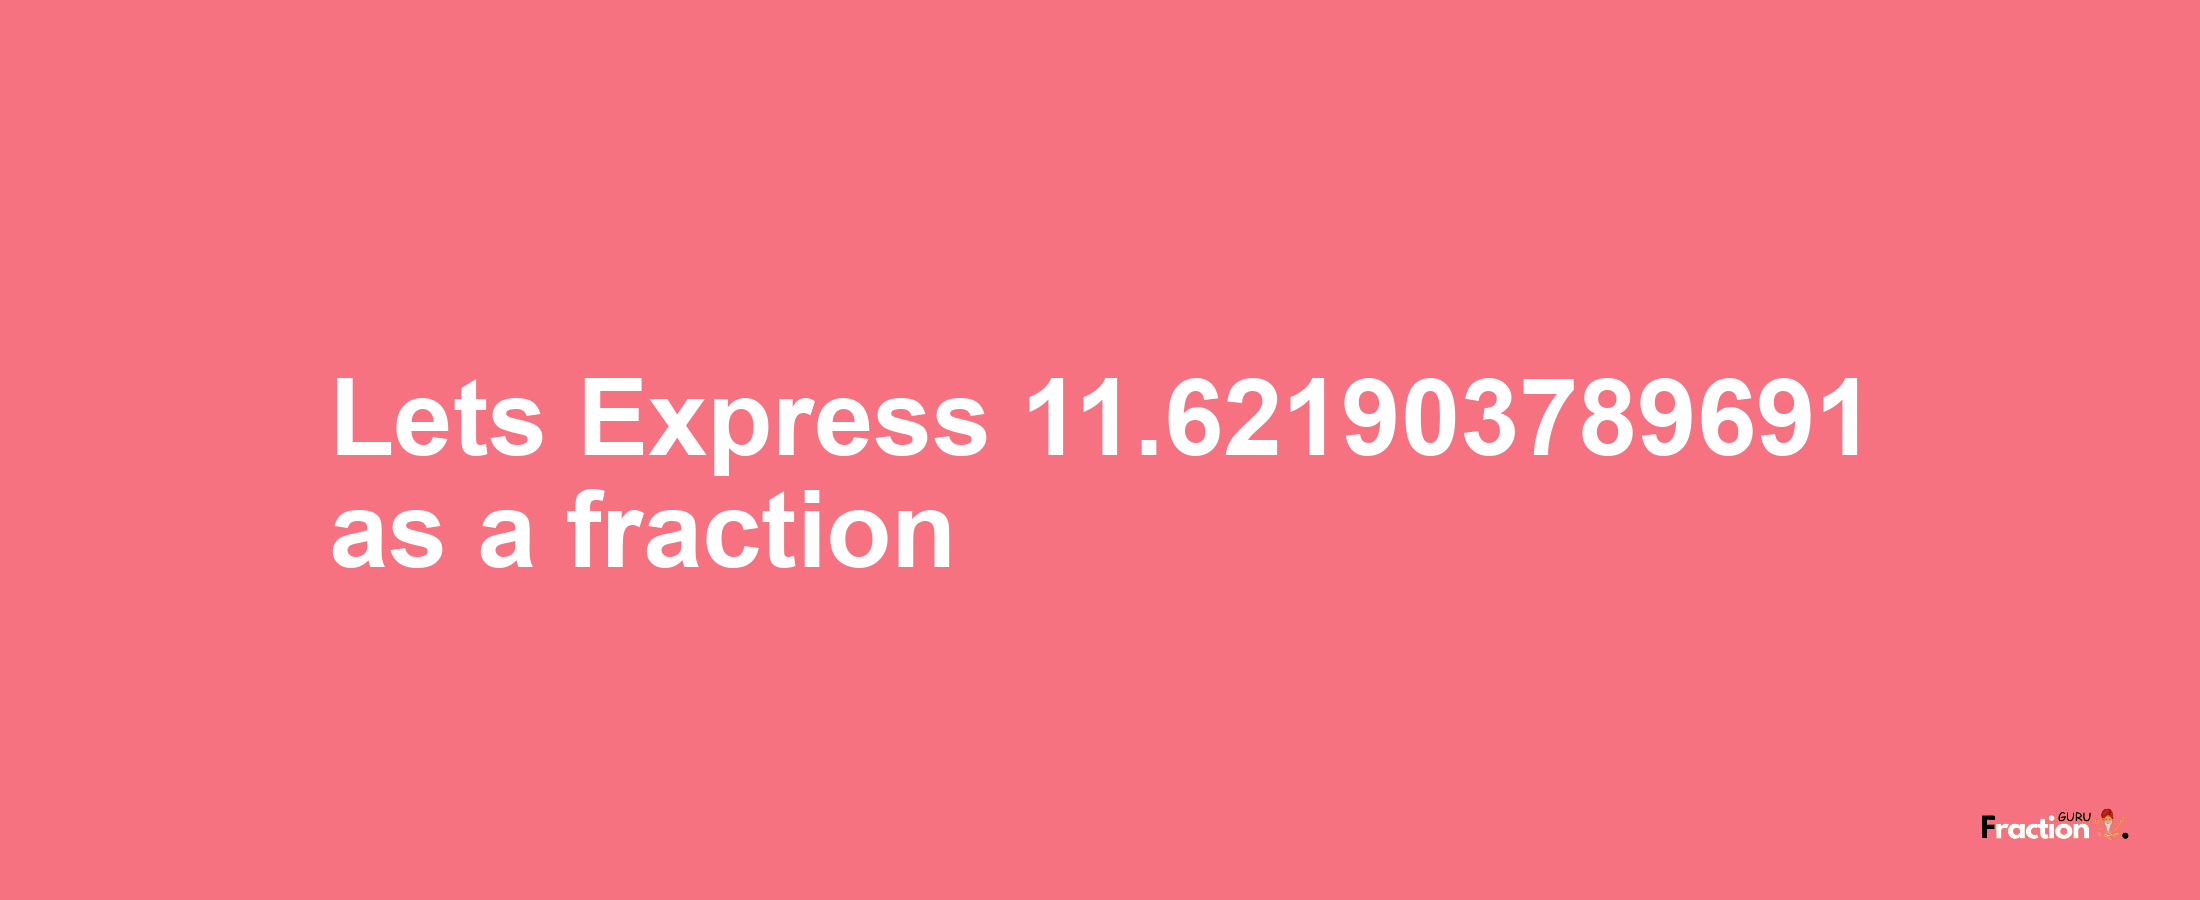 Lets Express 11.621903789691 as afraction